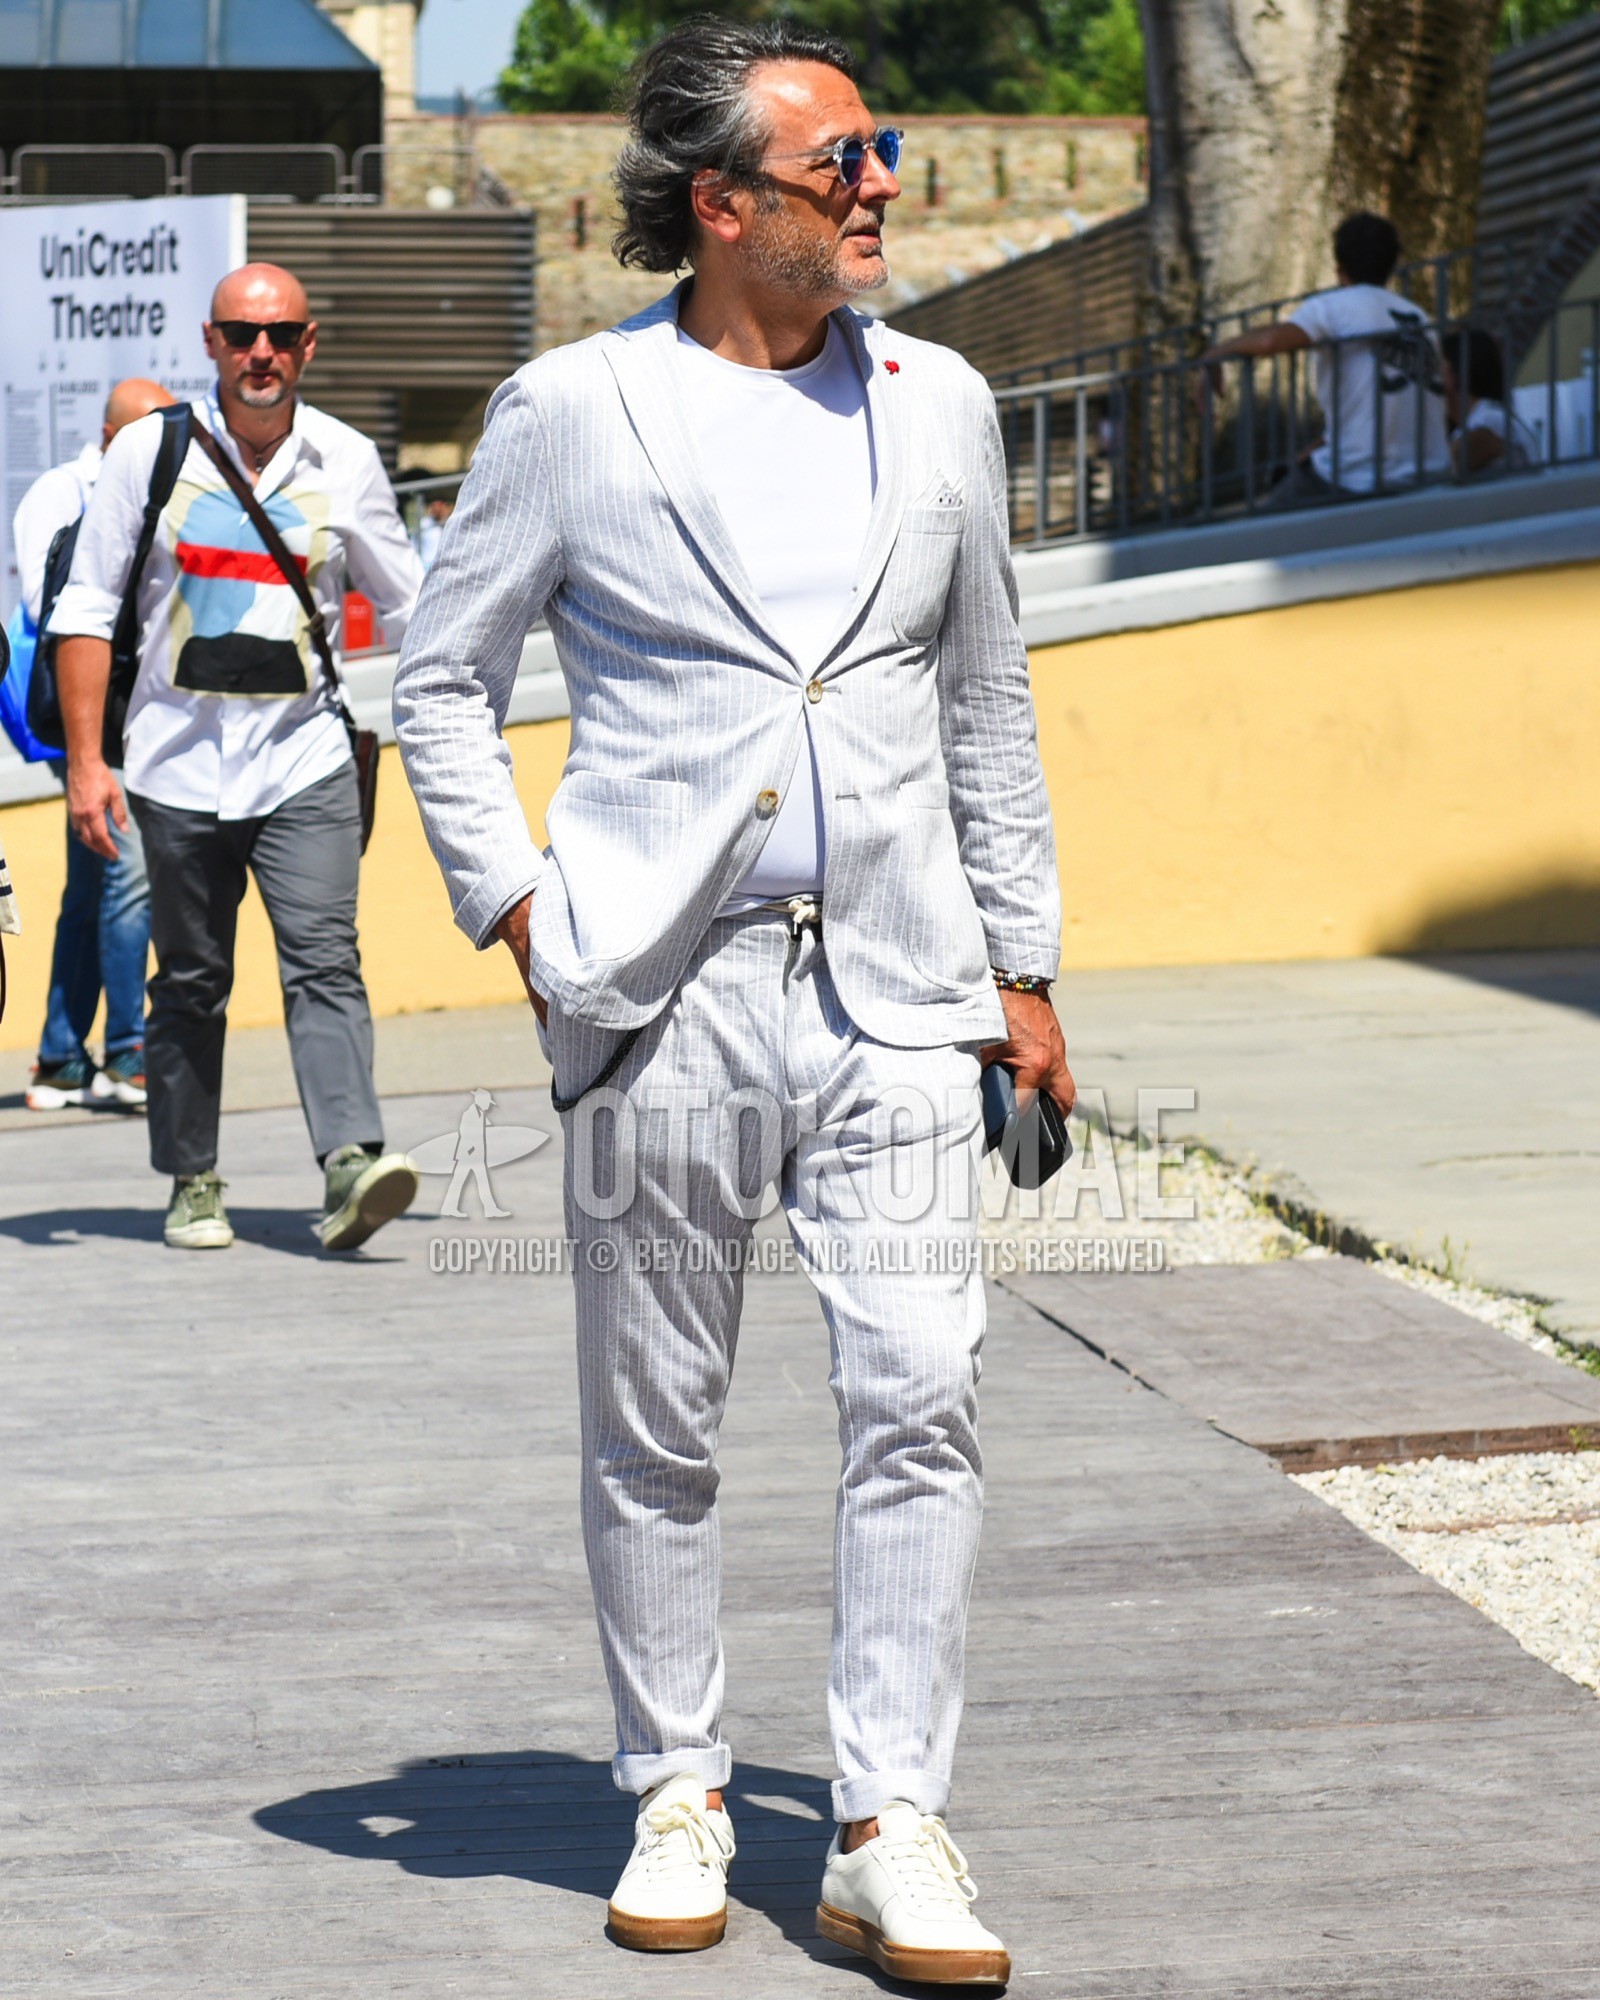 Men's spring summer outfit with clear plain sunglasses, white plain t-shirt, white low-cut sneakers, gray stripes suit.